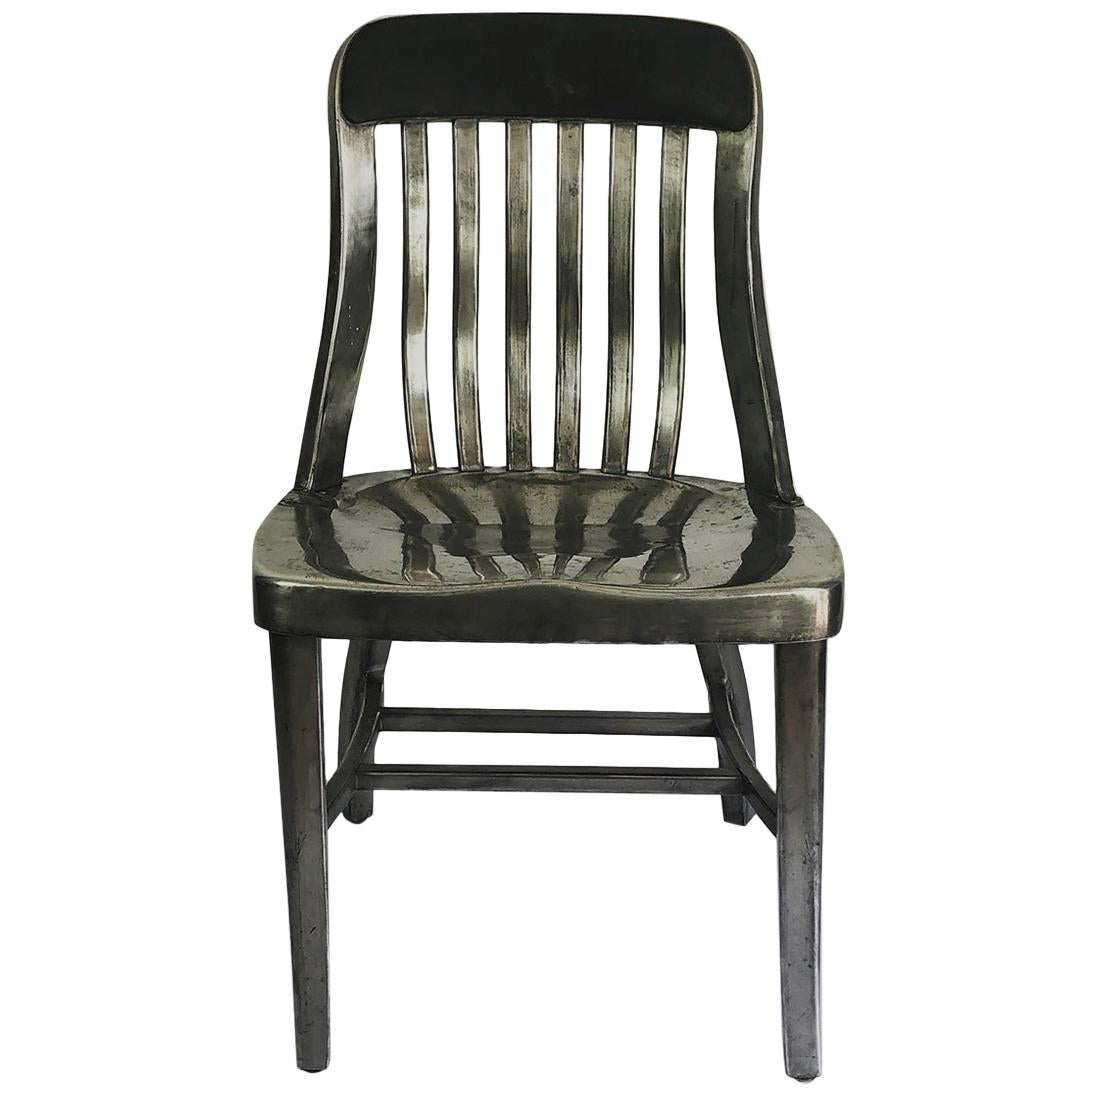 Early Aluminum Chair by General Fireproofing